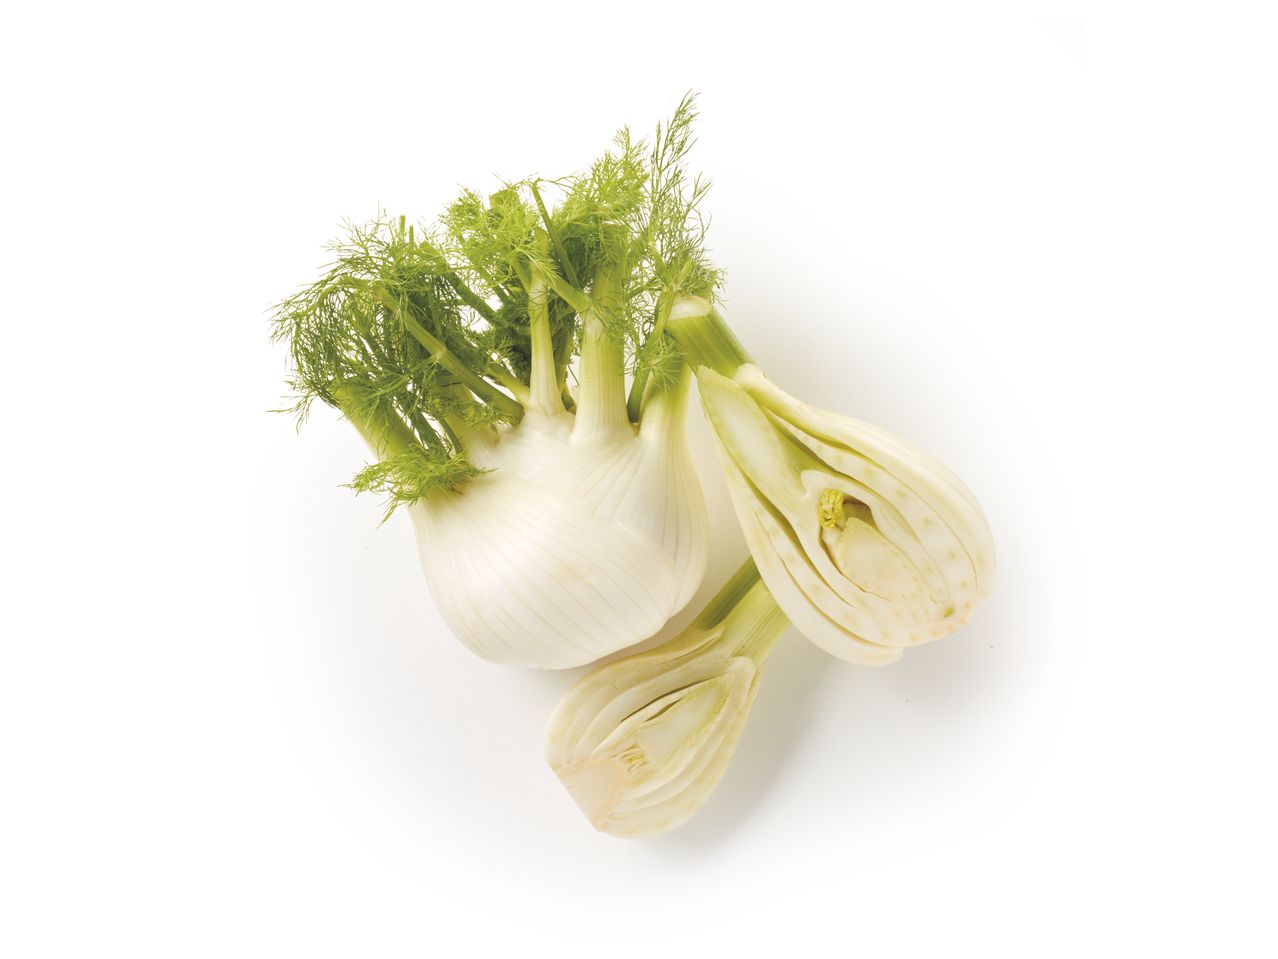 Go to full screen view: Fennel - Image 1